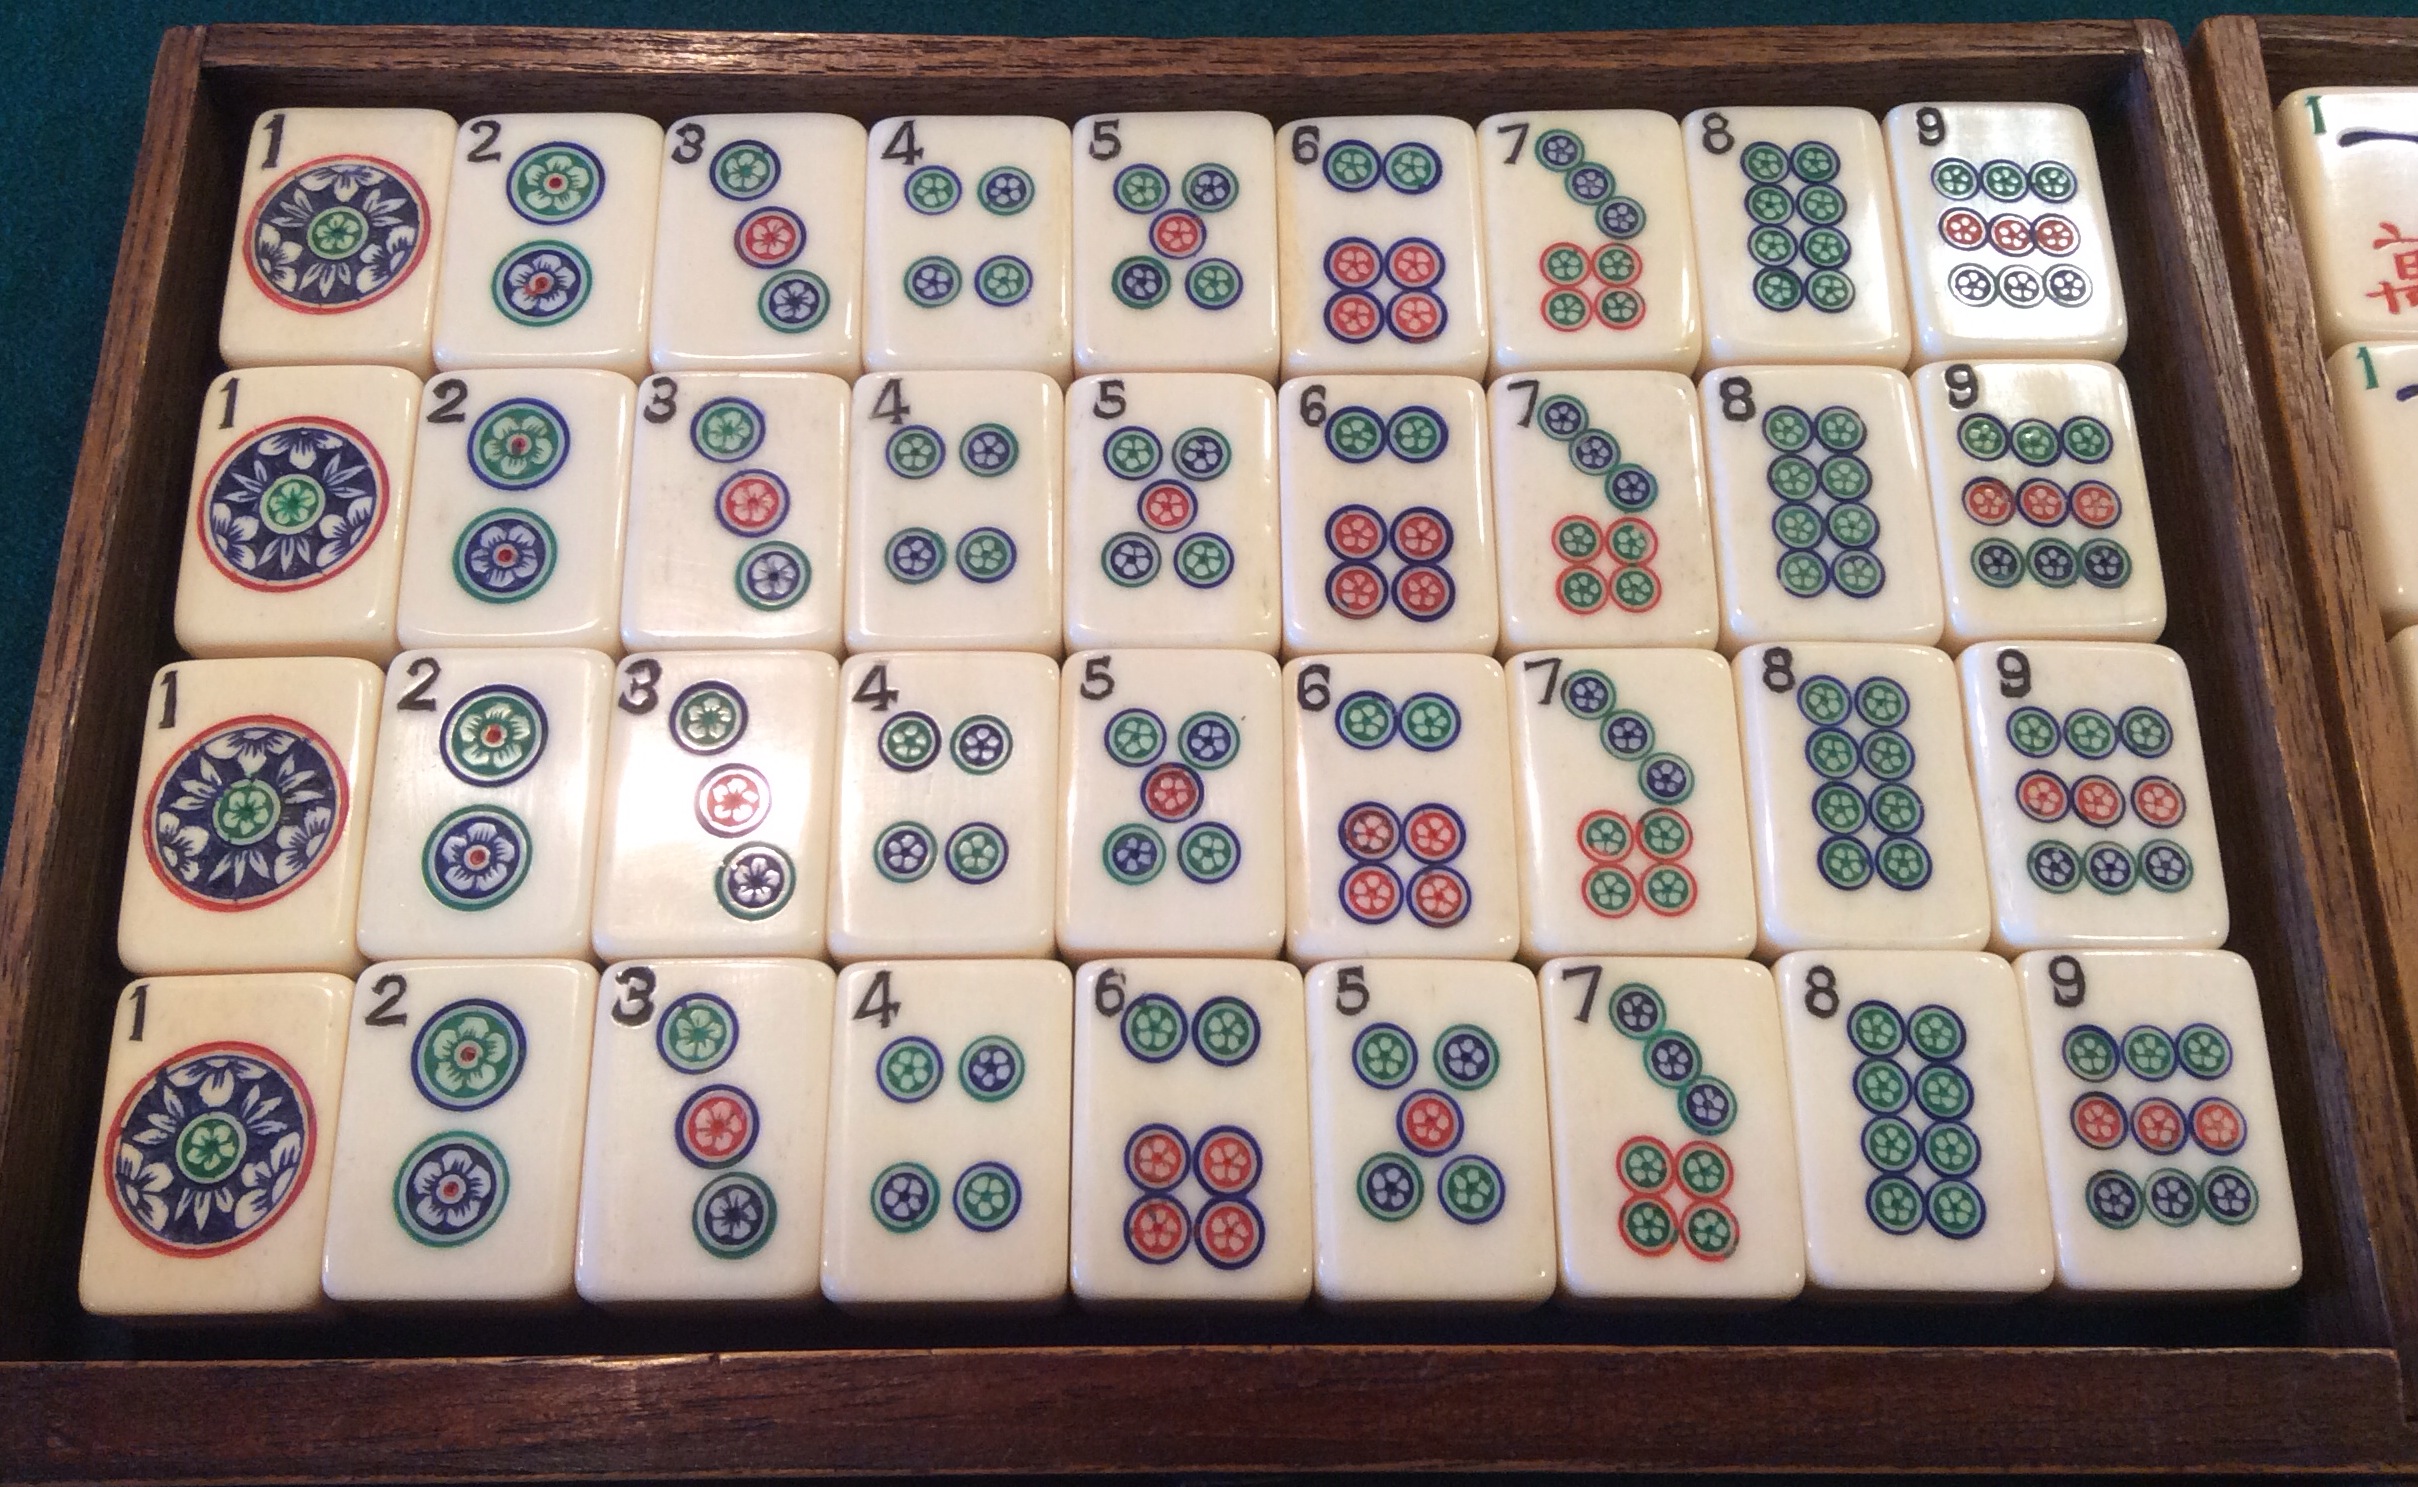 Anyone for mahjong? Play it with Prada! (This mahjong set is from